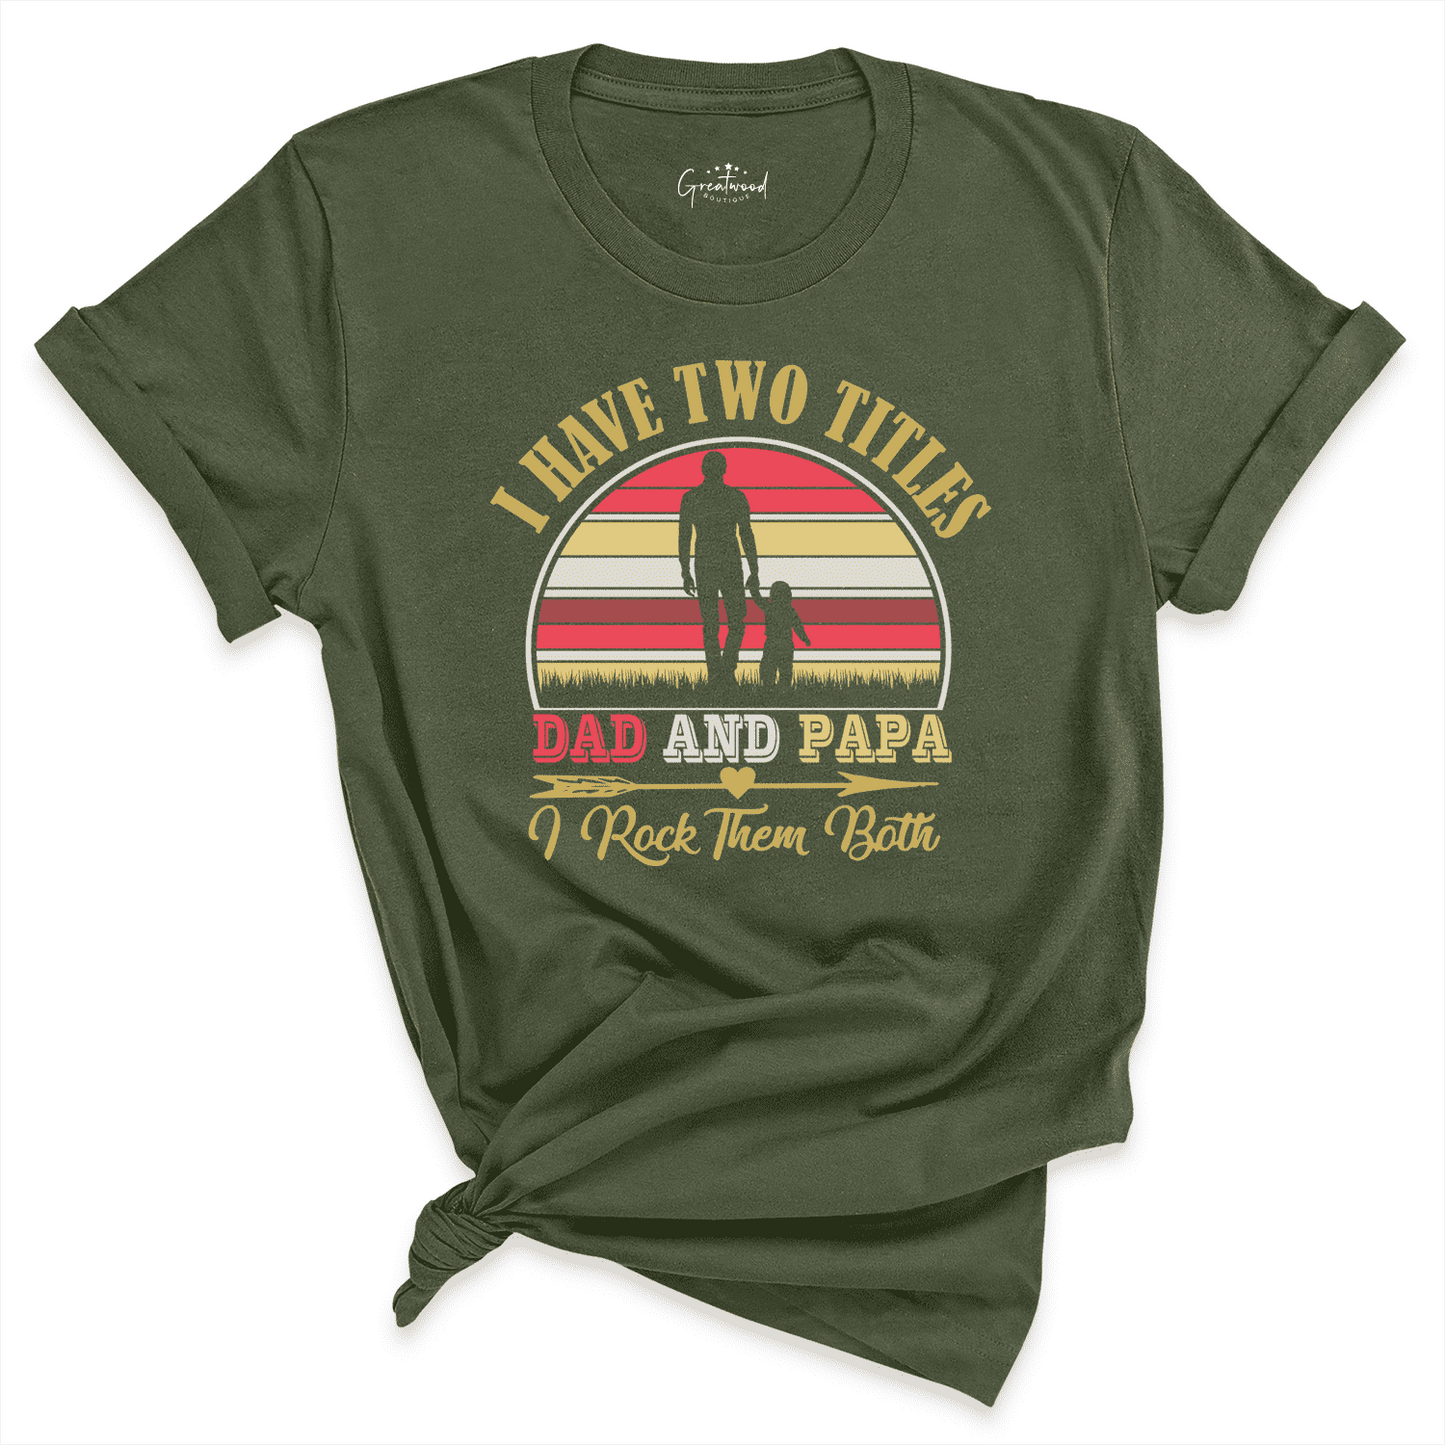 Dad and Papa Shirt Green - Greatwood Boutique